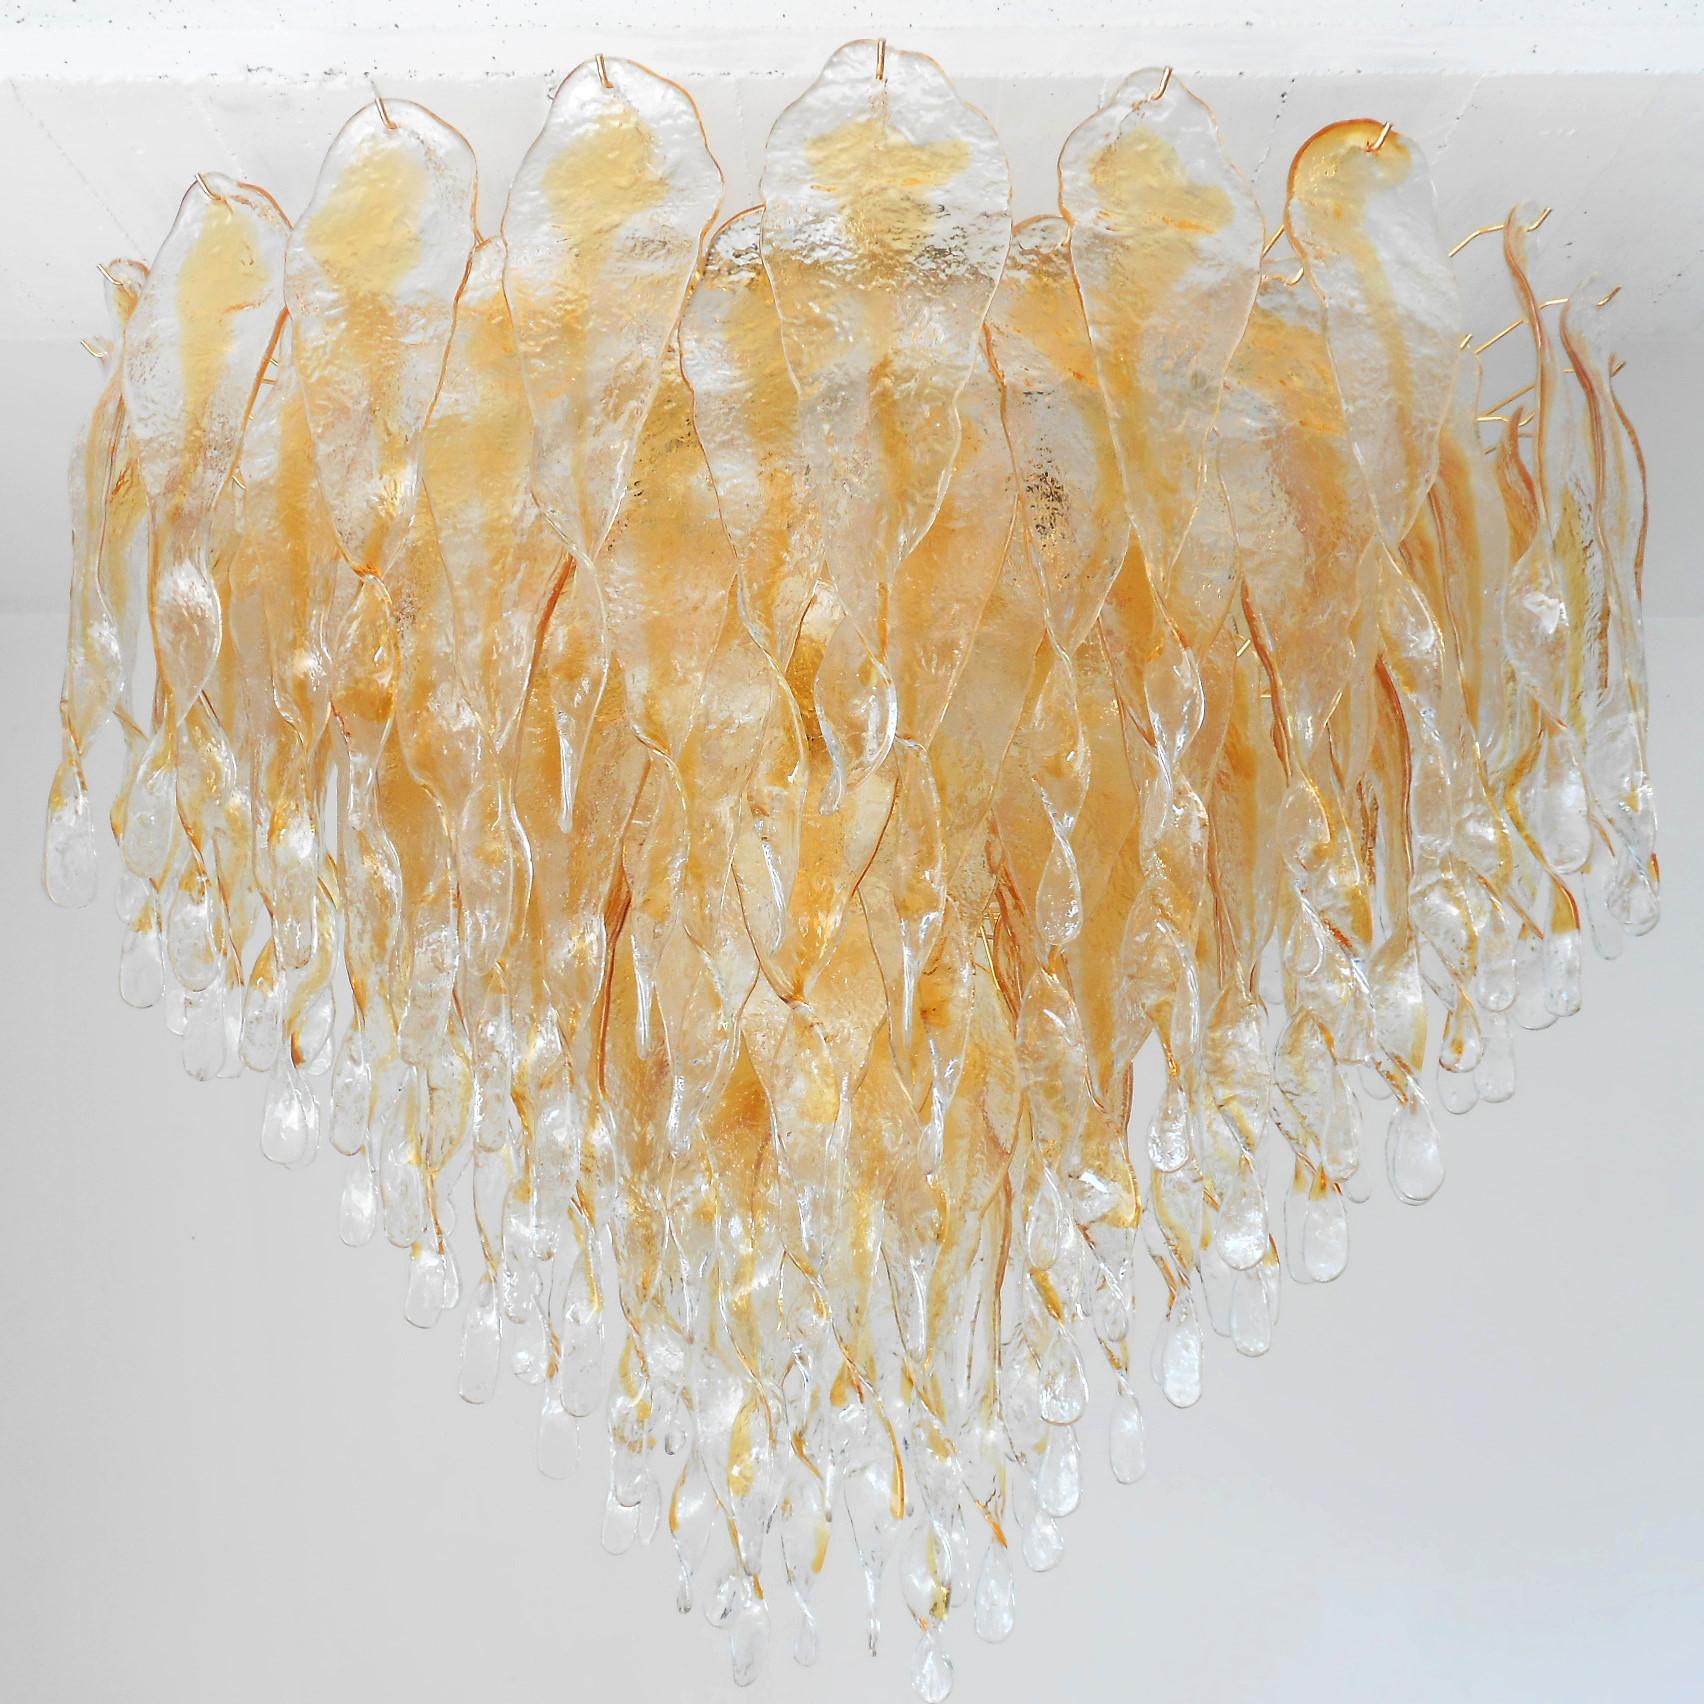 Italian chandelier shown with amber and clear Murano glasses hand blown to form beautiful dangling stalactite shaped glasses, mounted on chrome finish frame / Designed by Fabio Bergomi for Fabio Ltd, inspired by Mazzega / Made in Italy
21 lights /